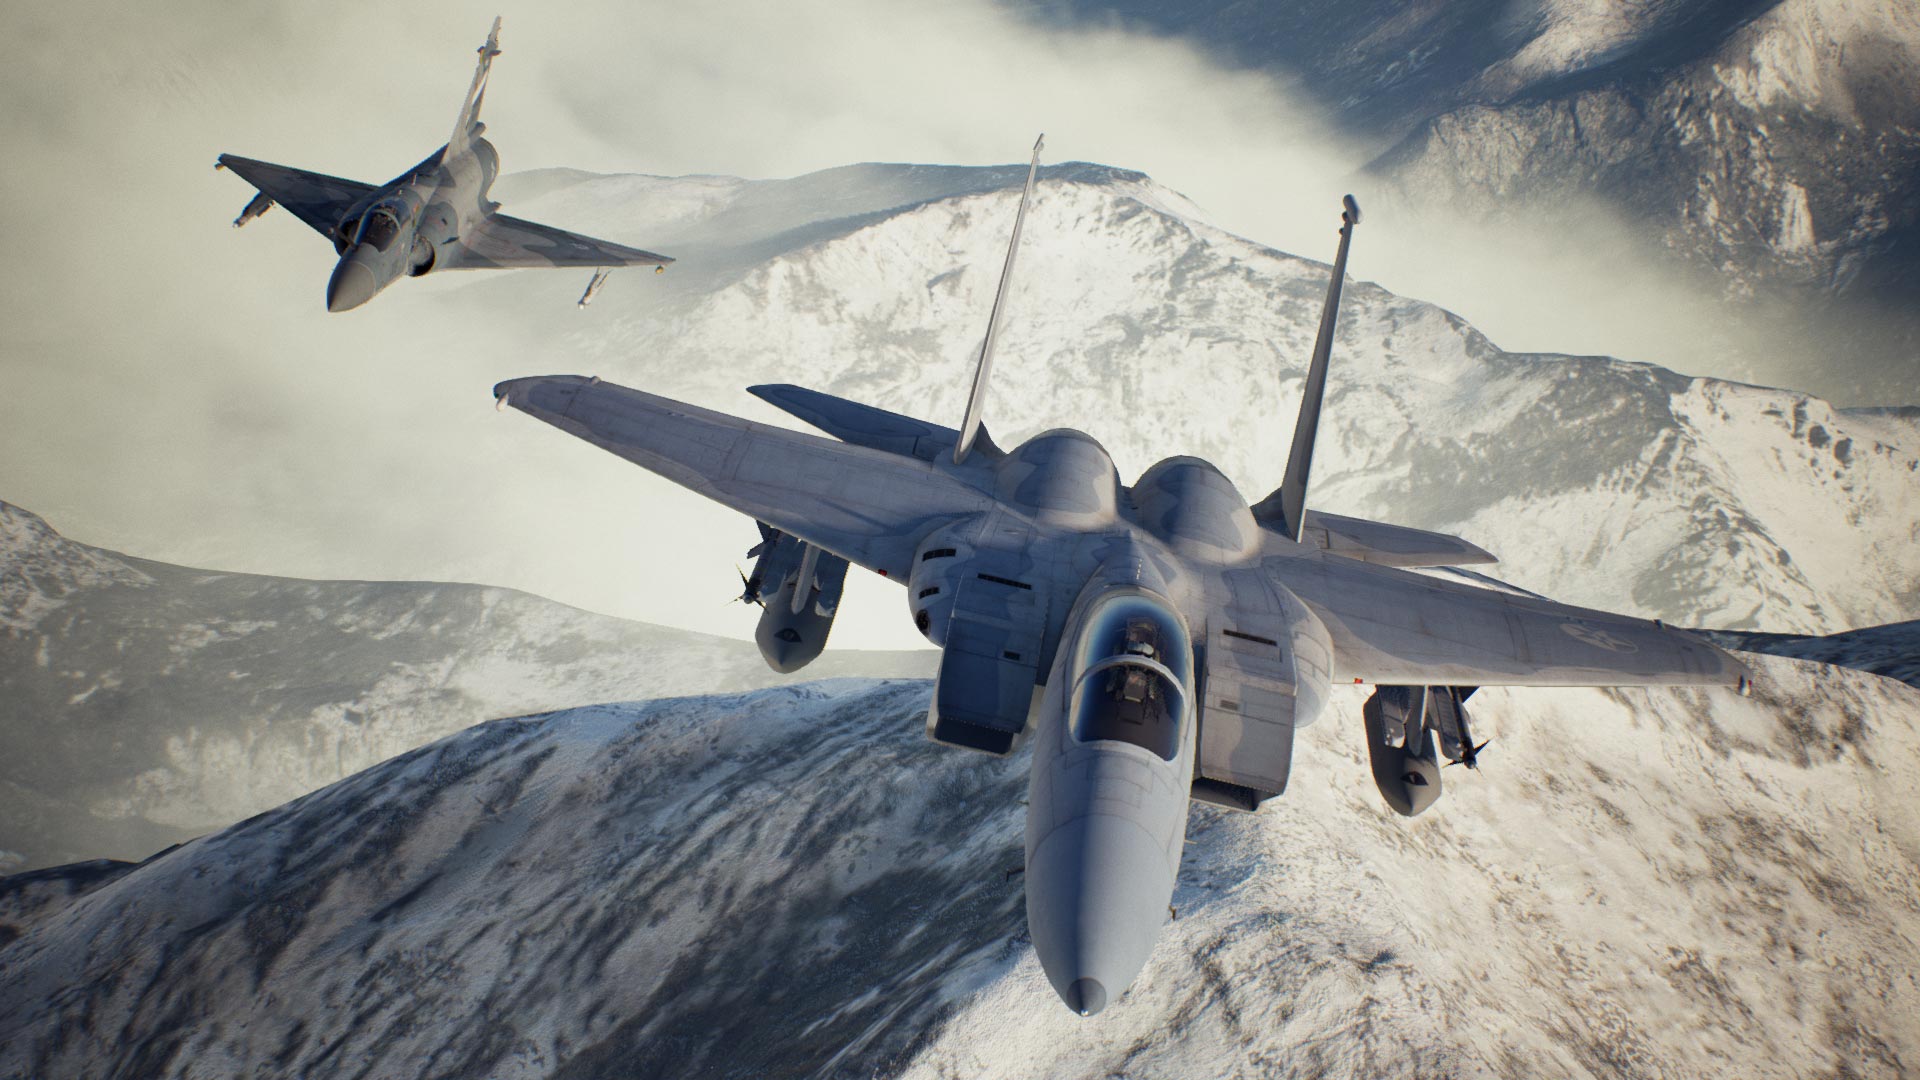 playstation store ace combat 7